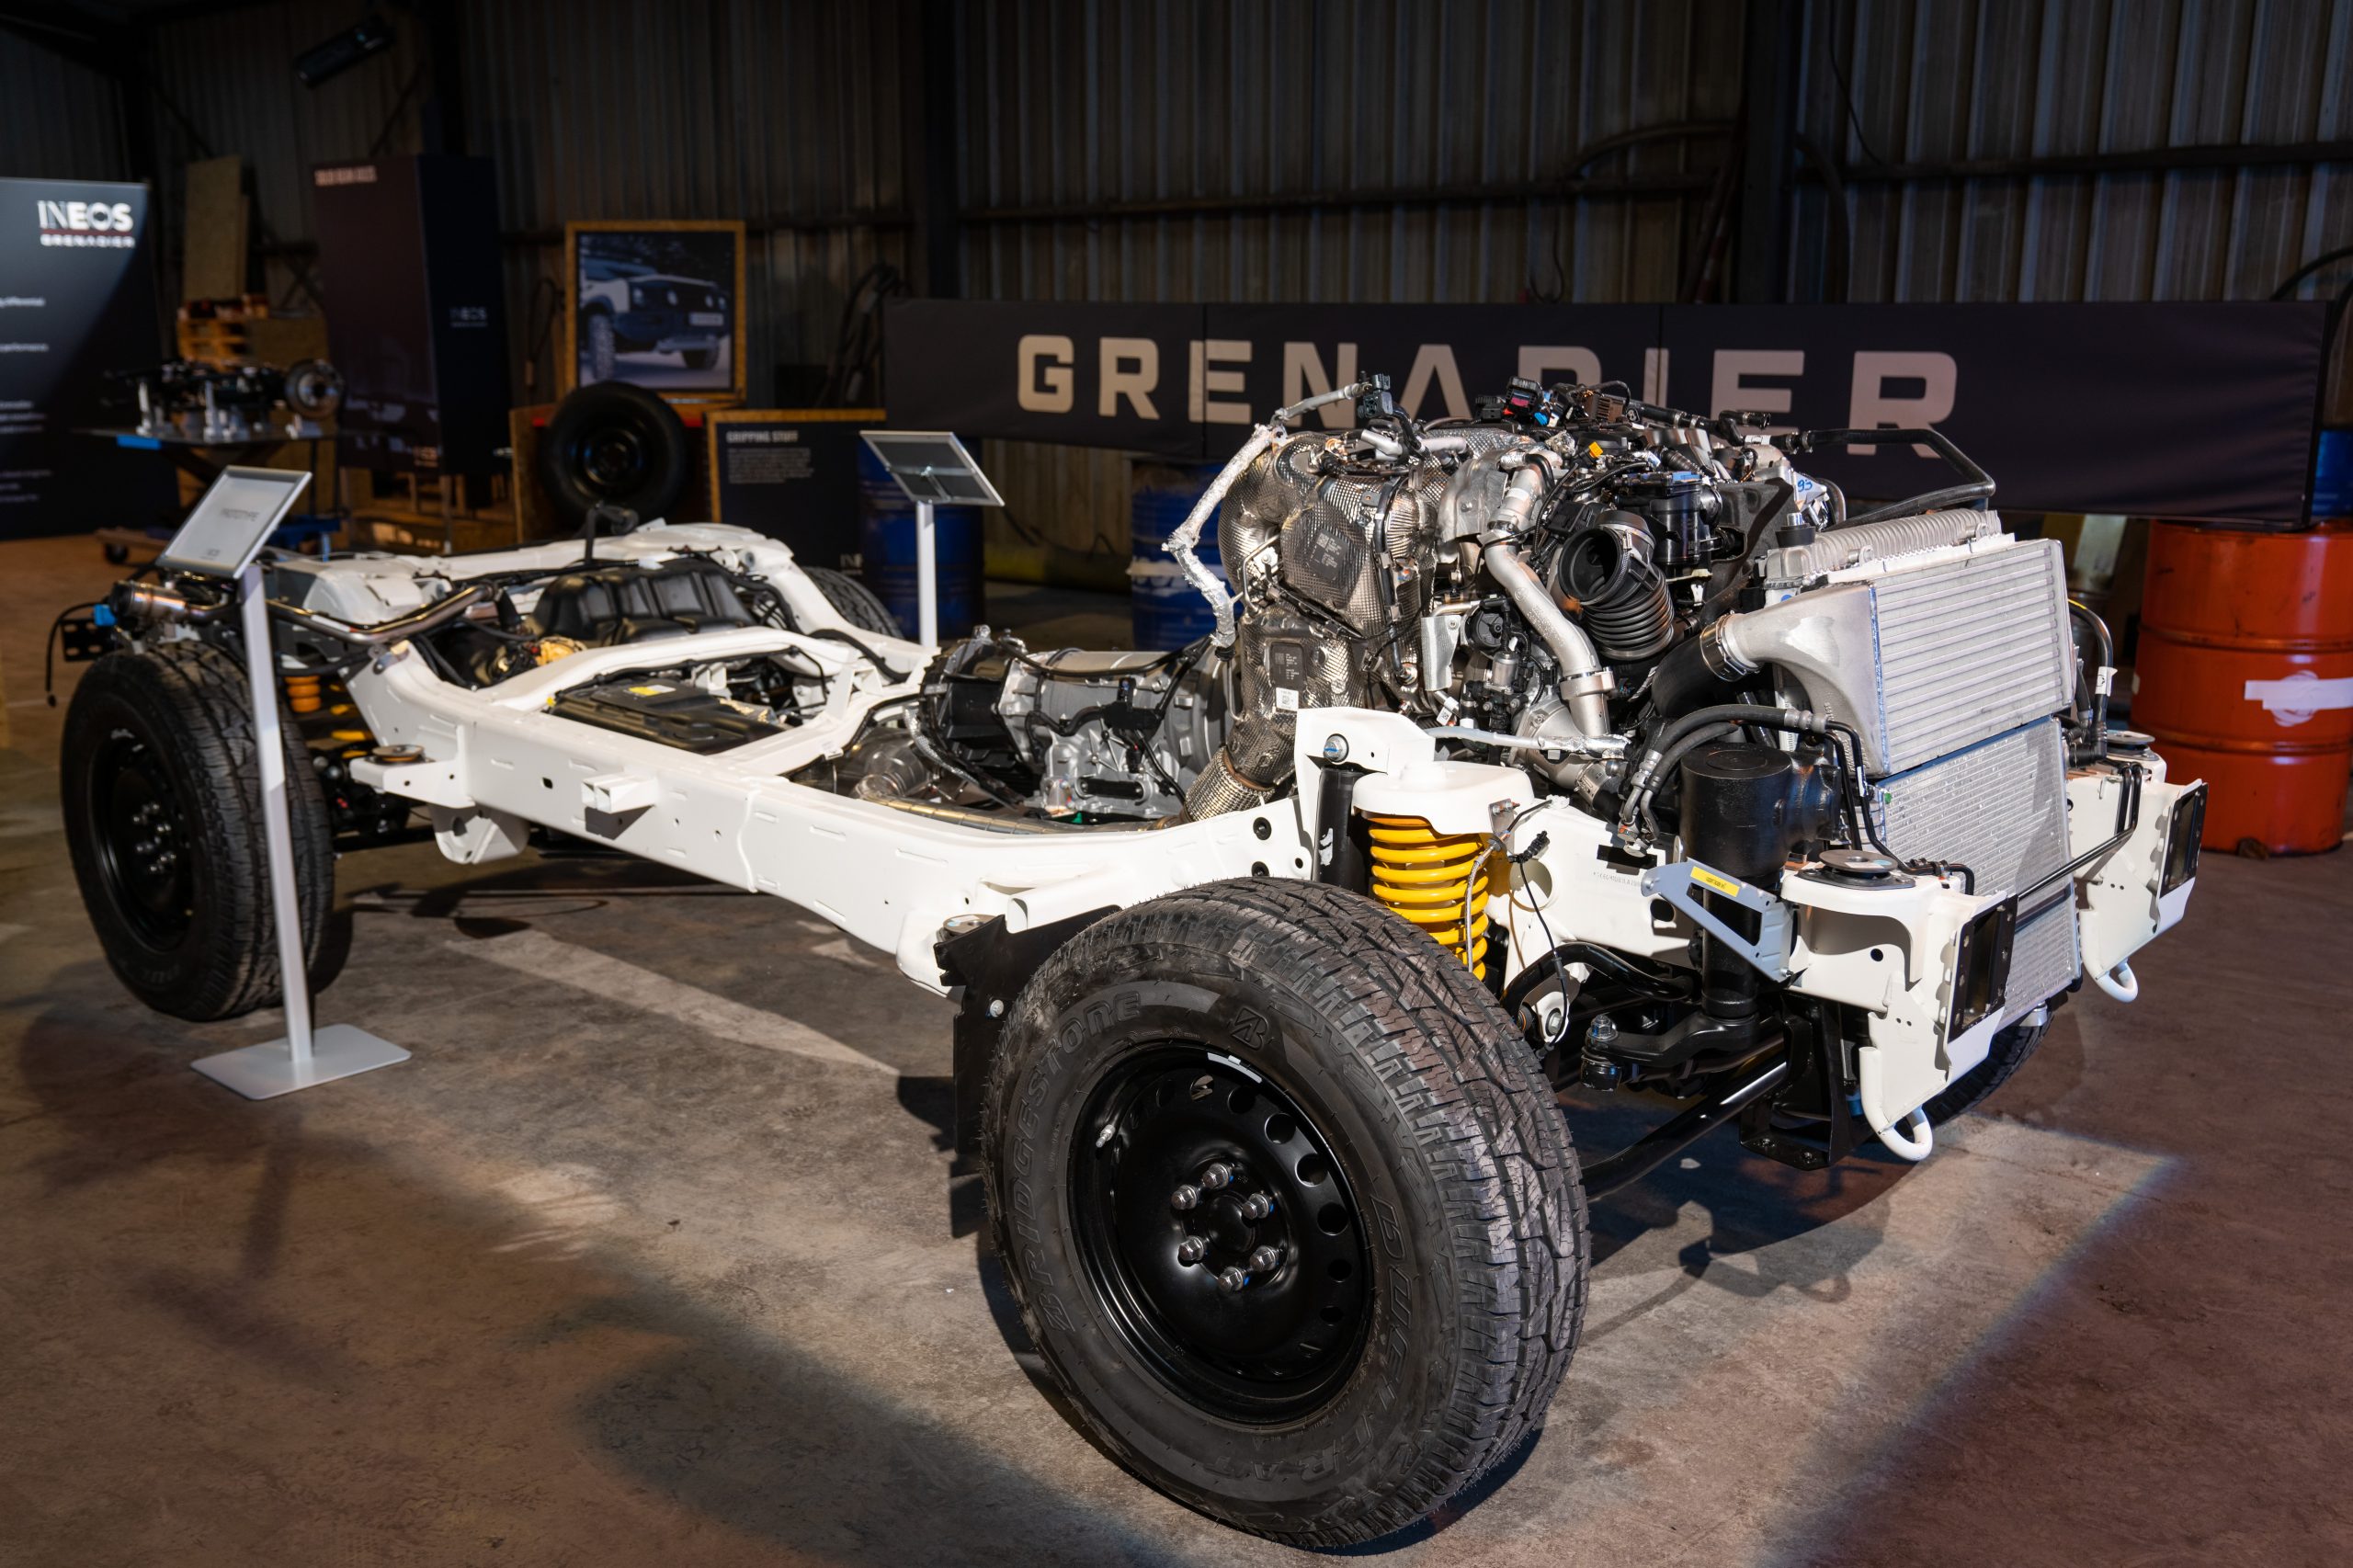 Ineos Grenadier chassis